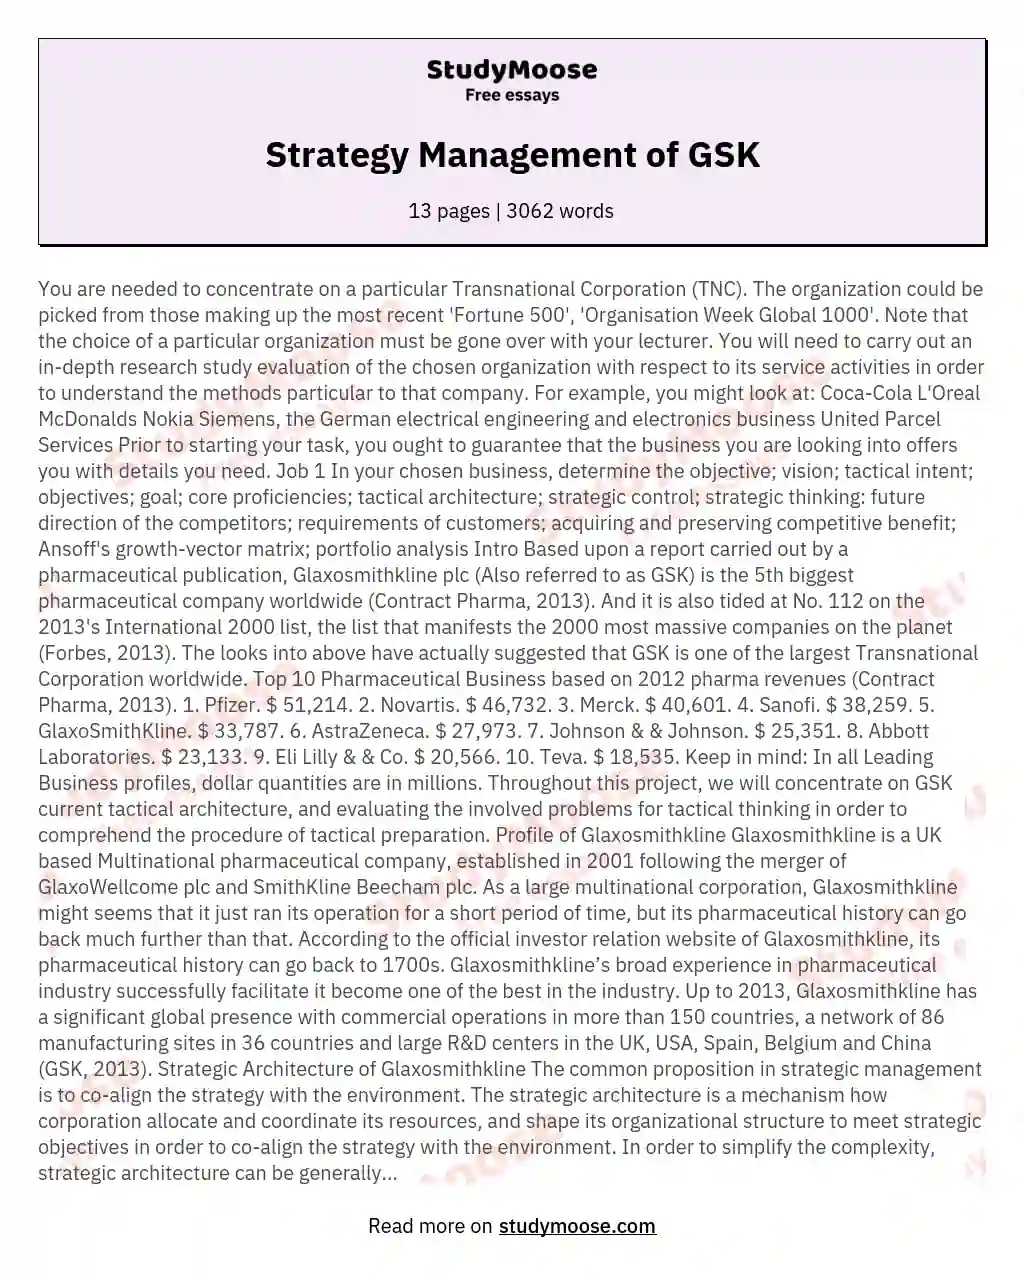 Strategy Management of GSK essay